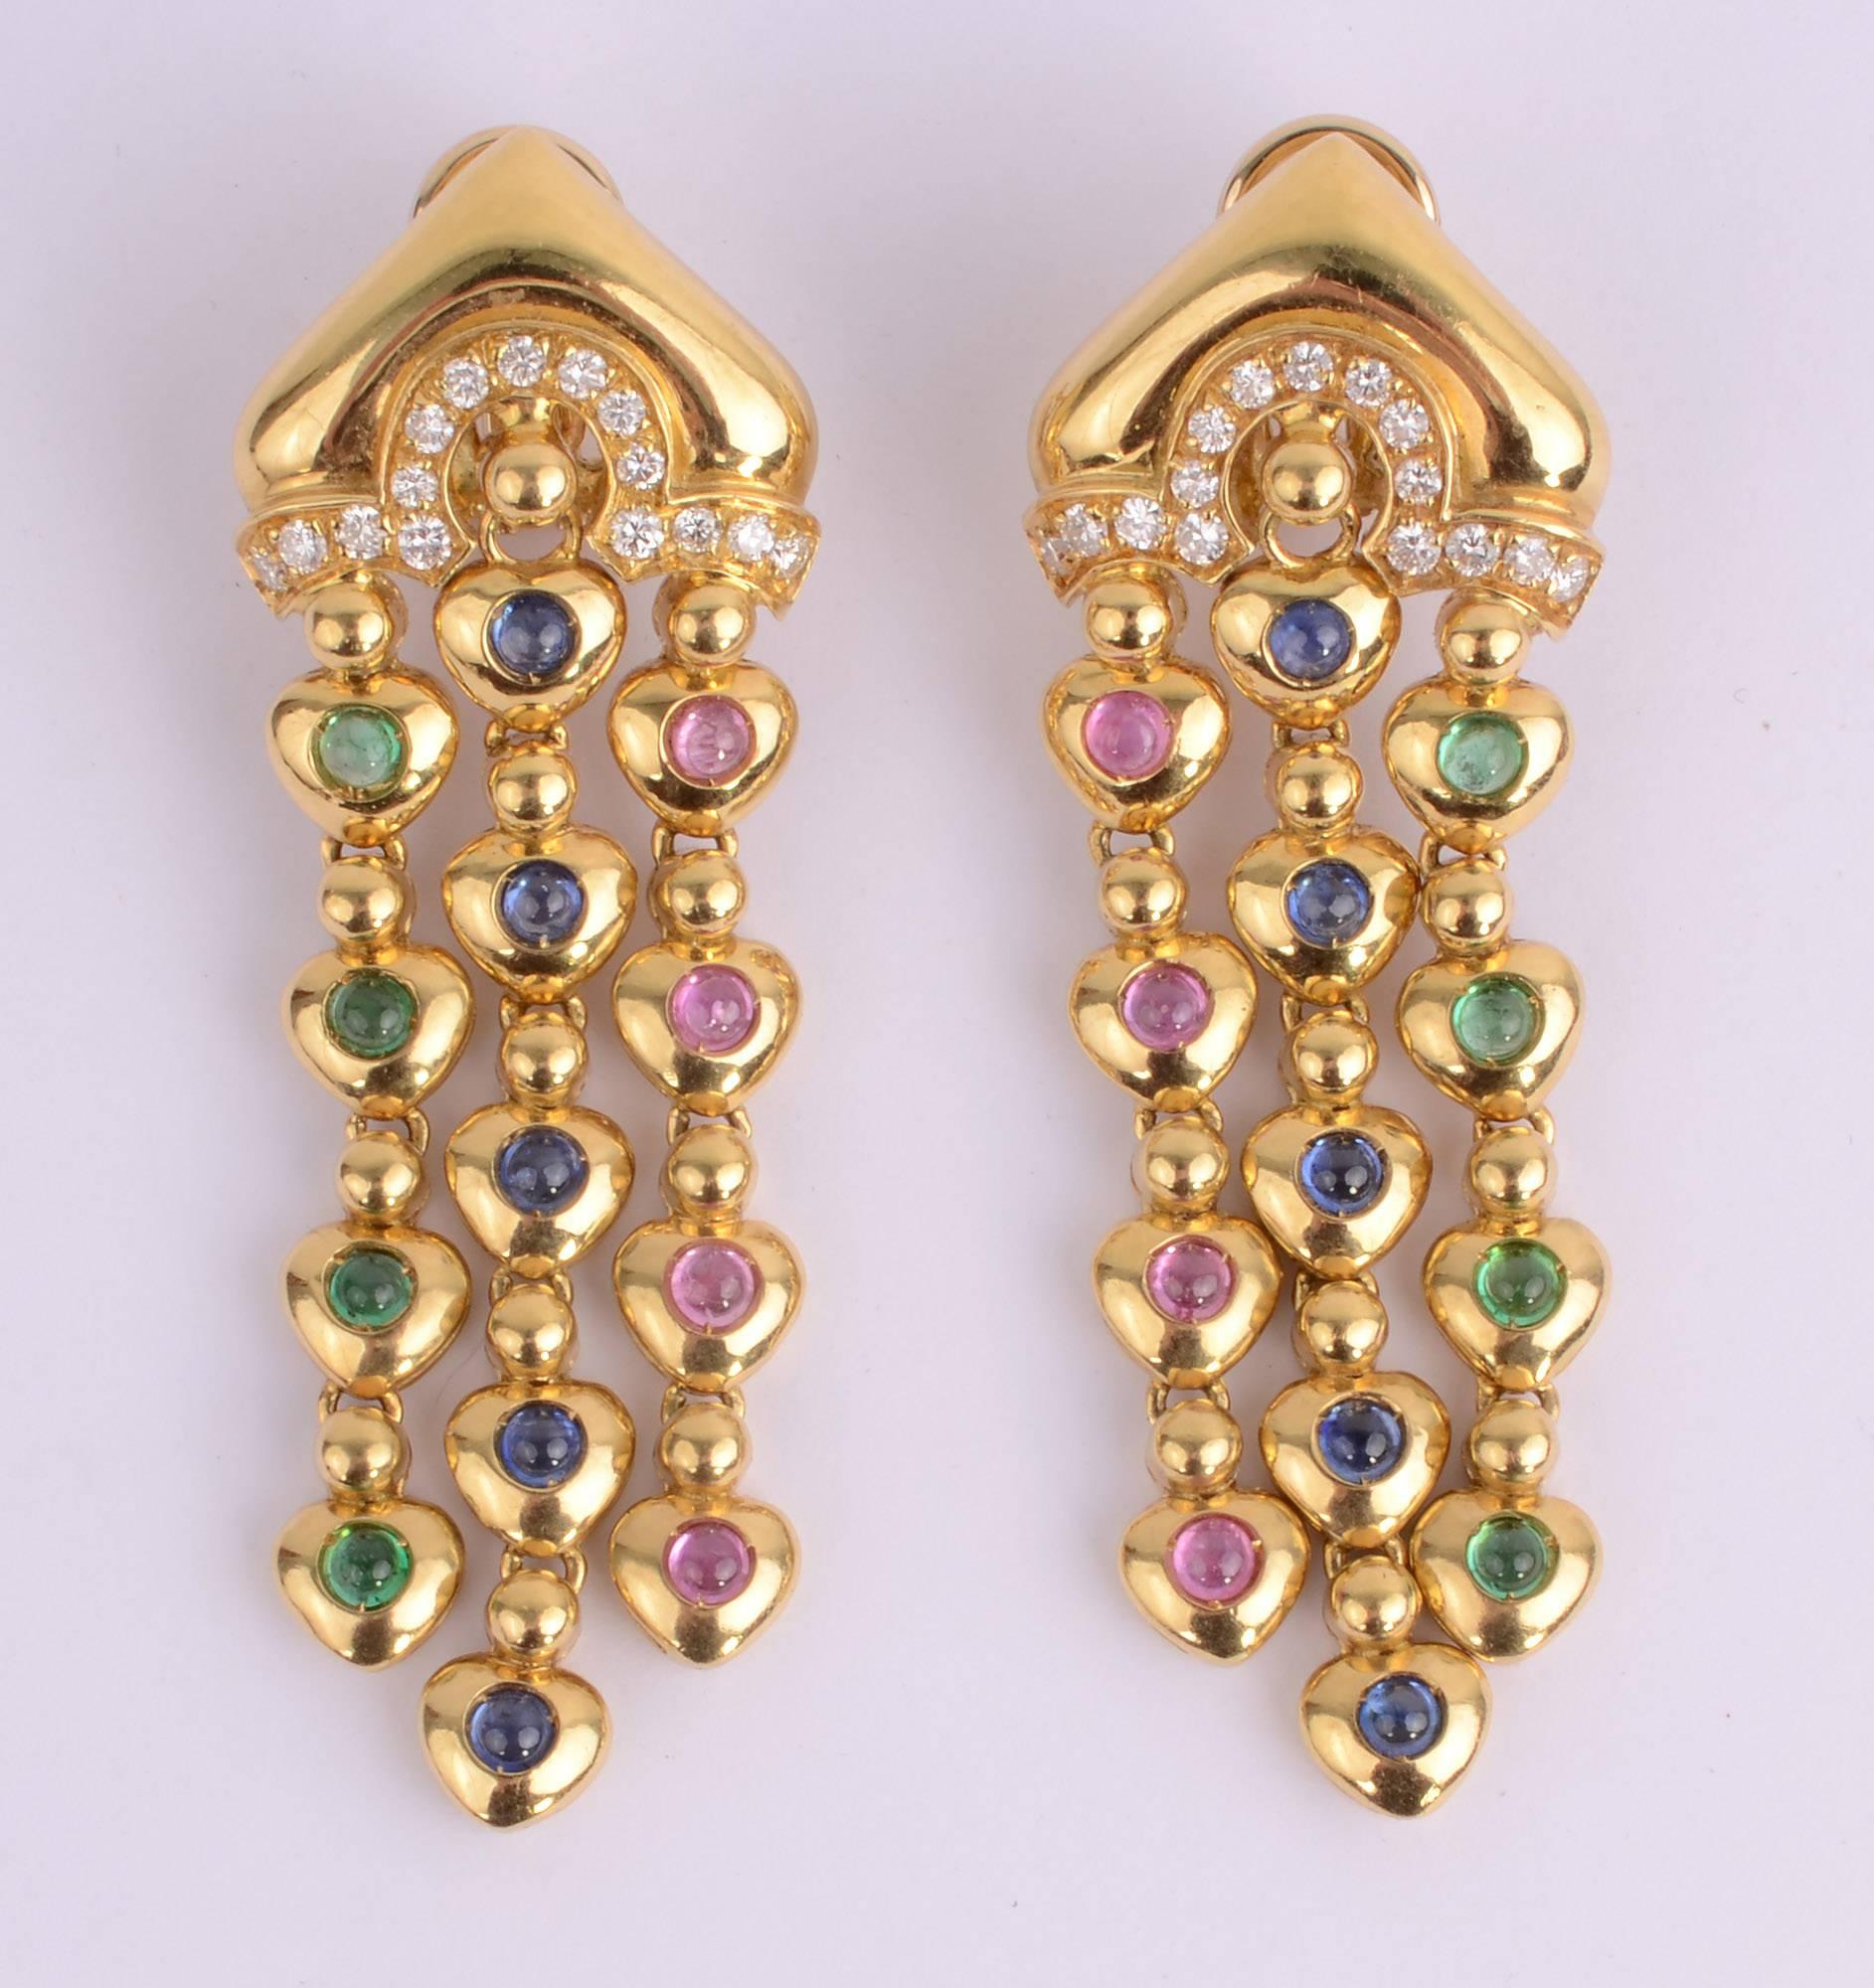 Exquisite 18 karat gold dangle earrings by Salavetti with diamonds on top and strands of pink, green and blue tourmalines. They measure 2 5/8 inches in length and 7/8 inch in width across the top. The nicely detailed backs are evidence of the fine